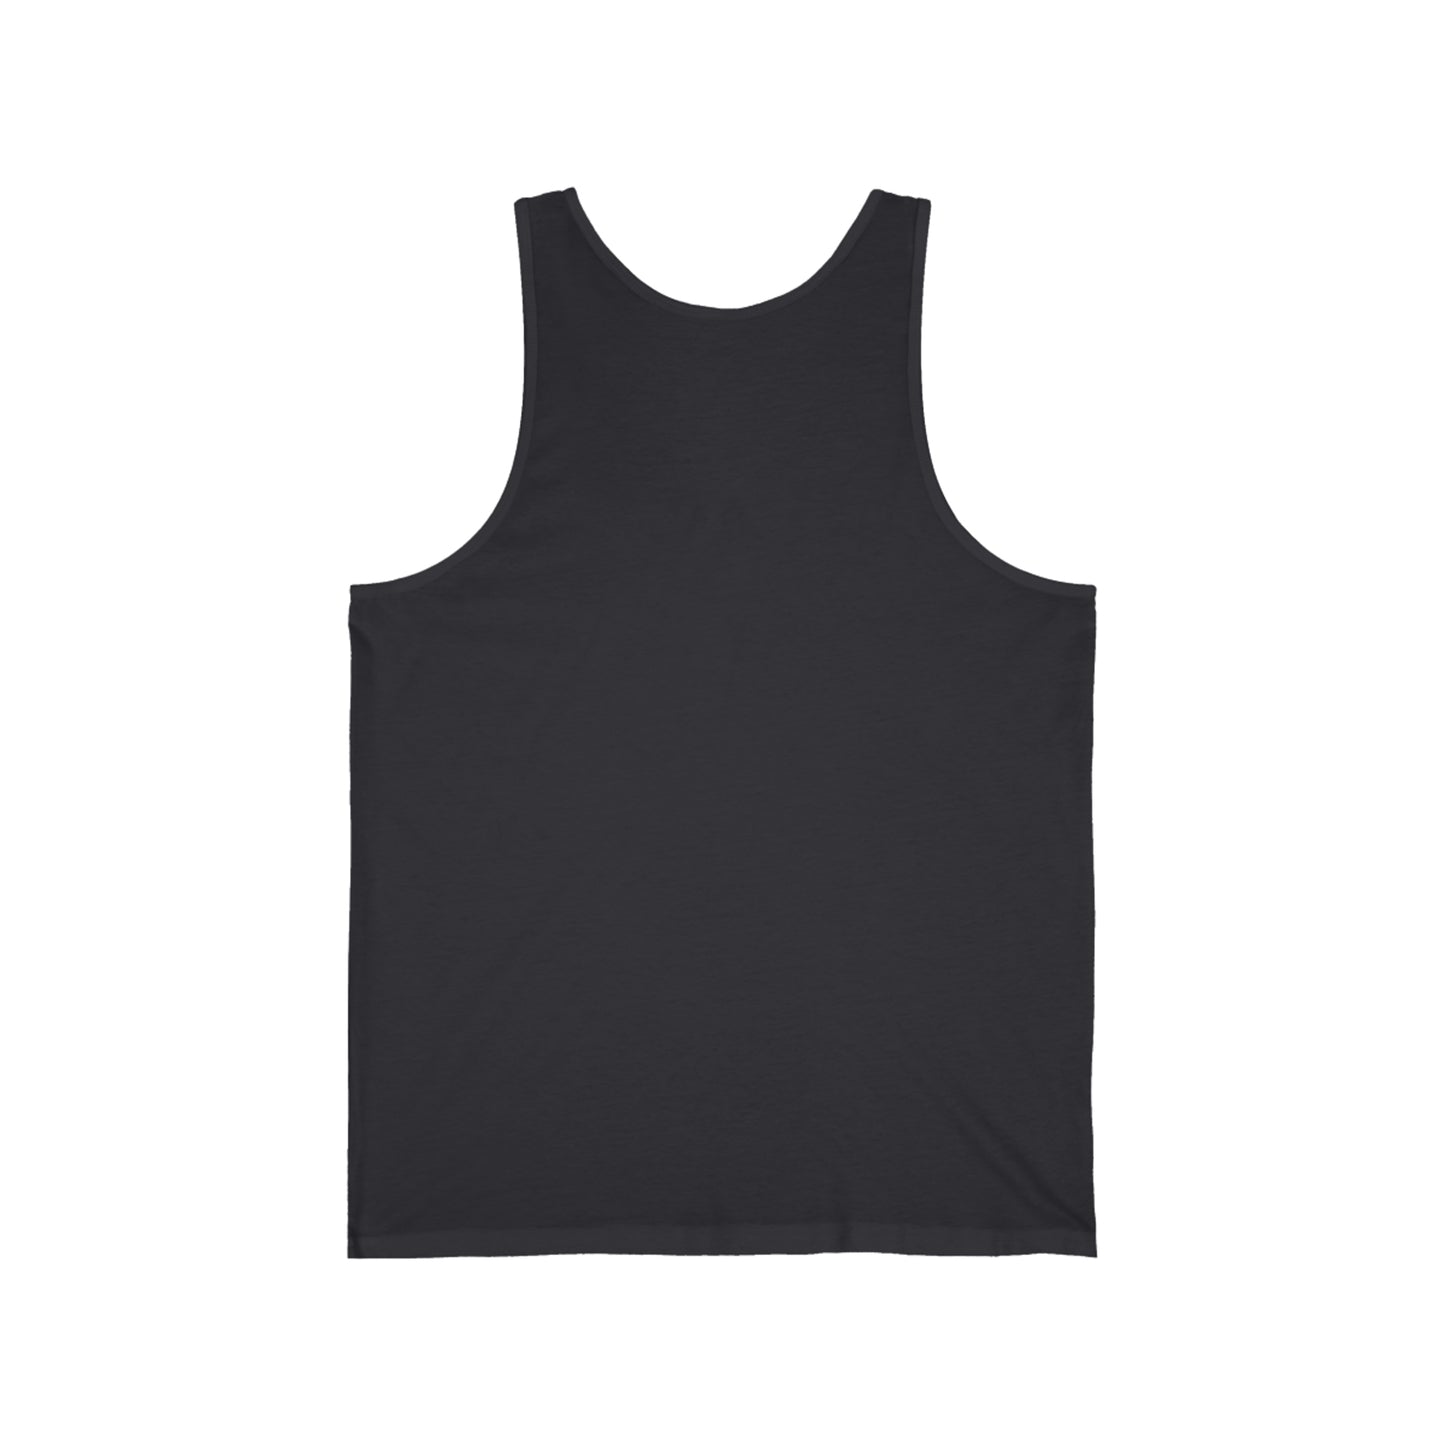 There's the Y Unisex Jersey Tank